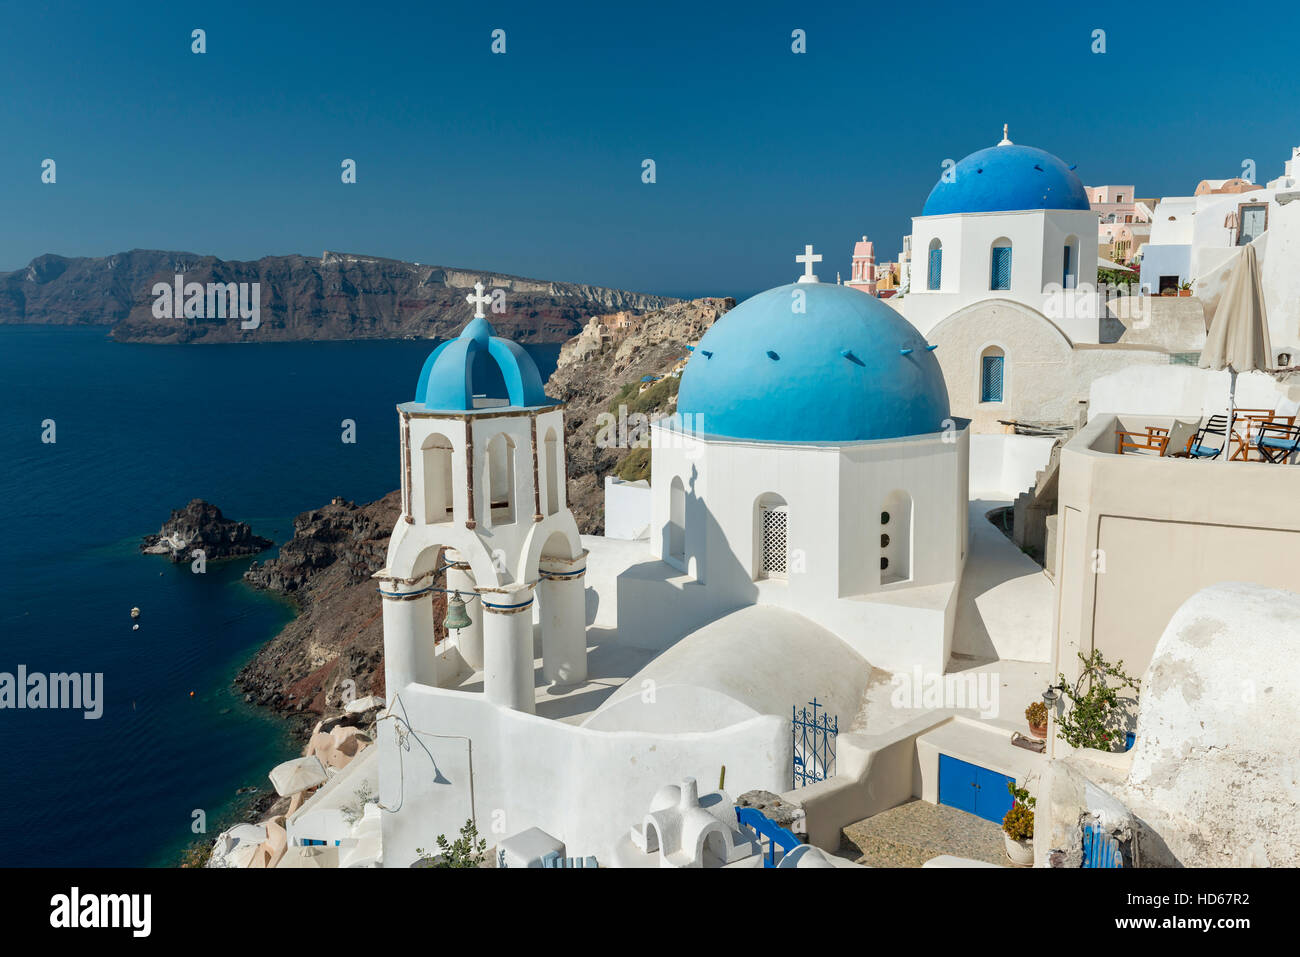 Orthodox church with blue dome and bell tower, Oia, Santorini, Cyclades, Greece Stock Photo